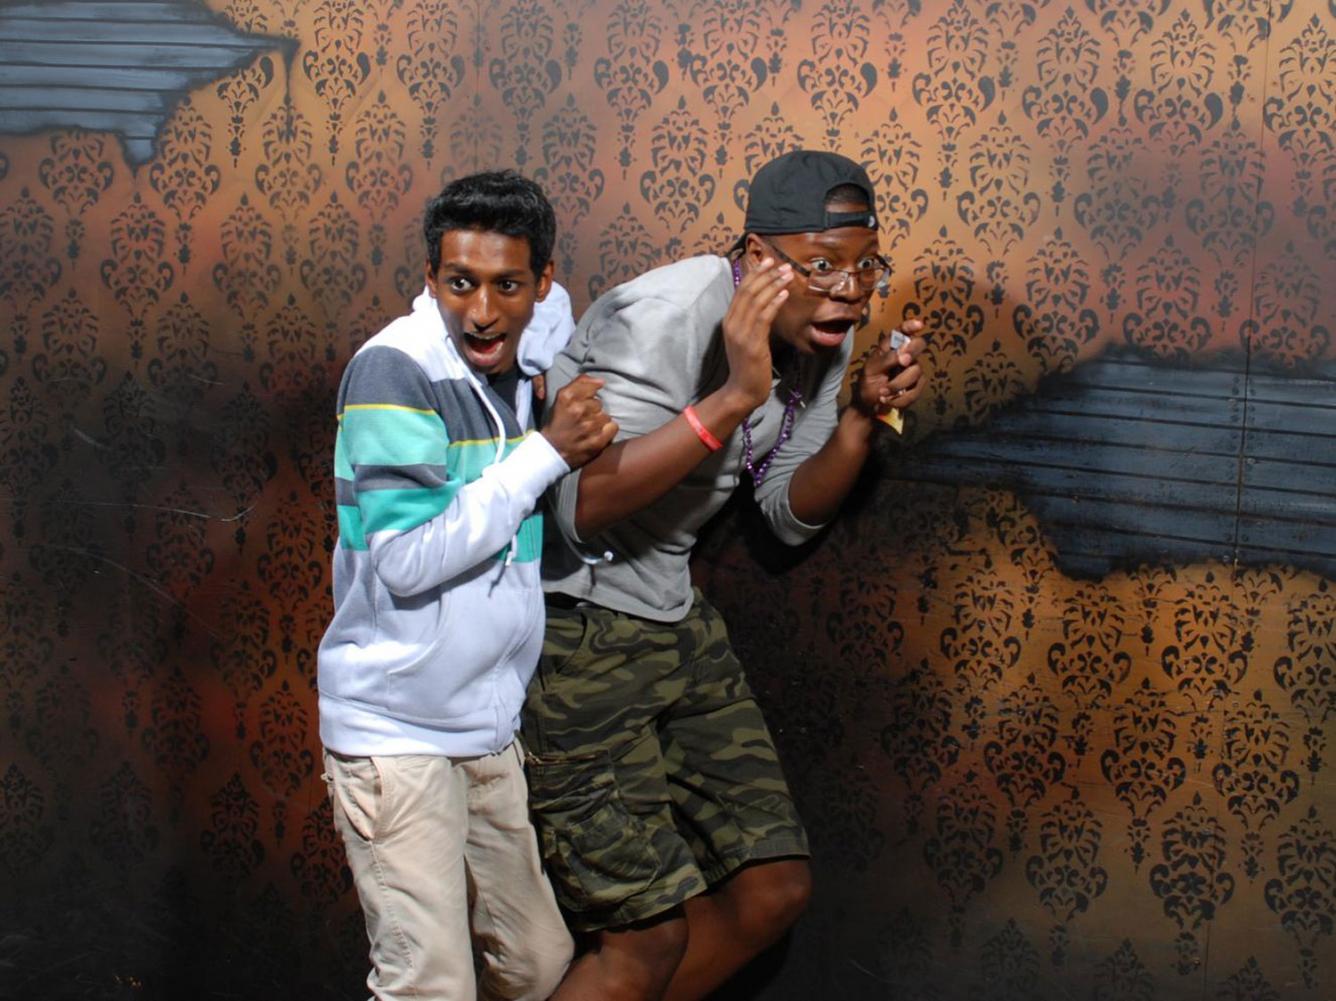 Nightmares Fear Factory Top 40 September 2013 pic01282